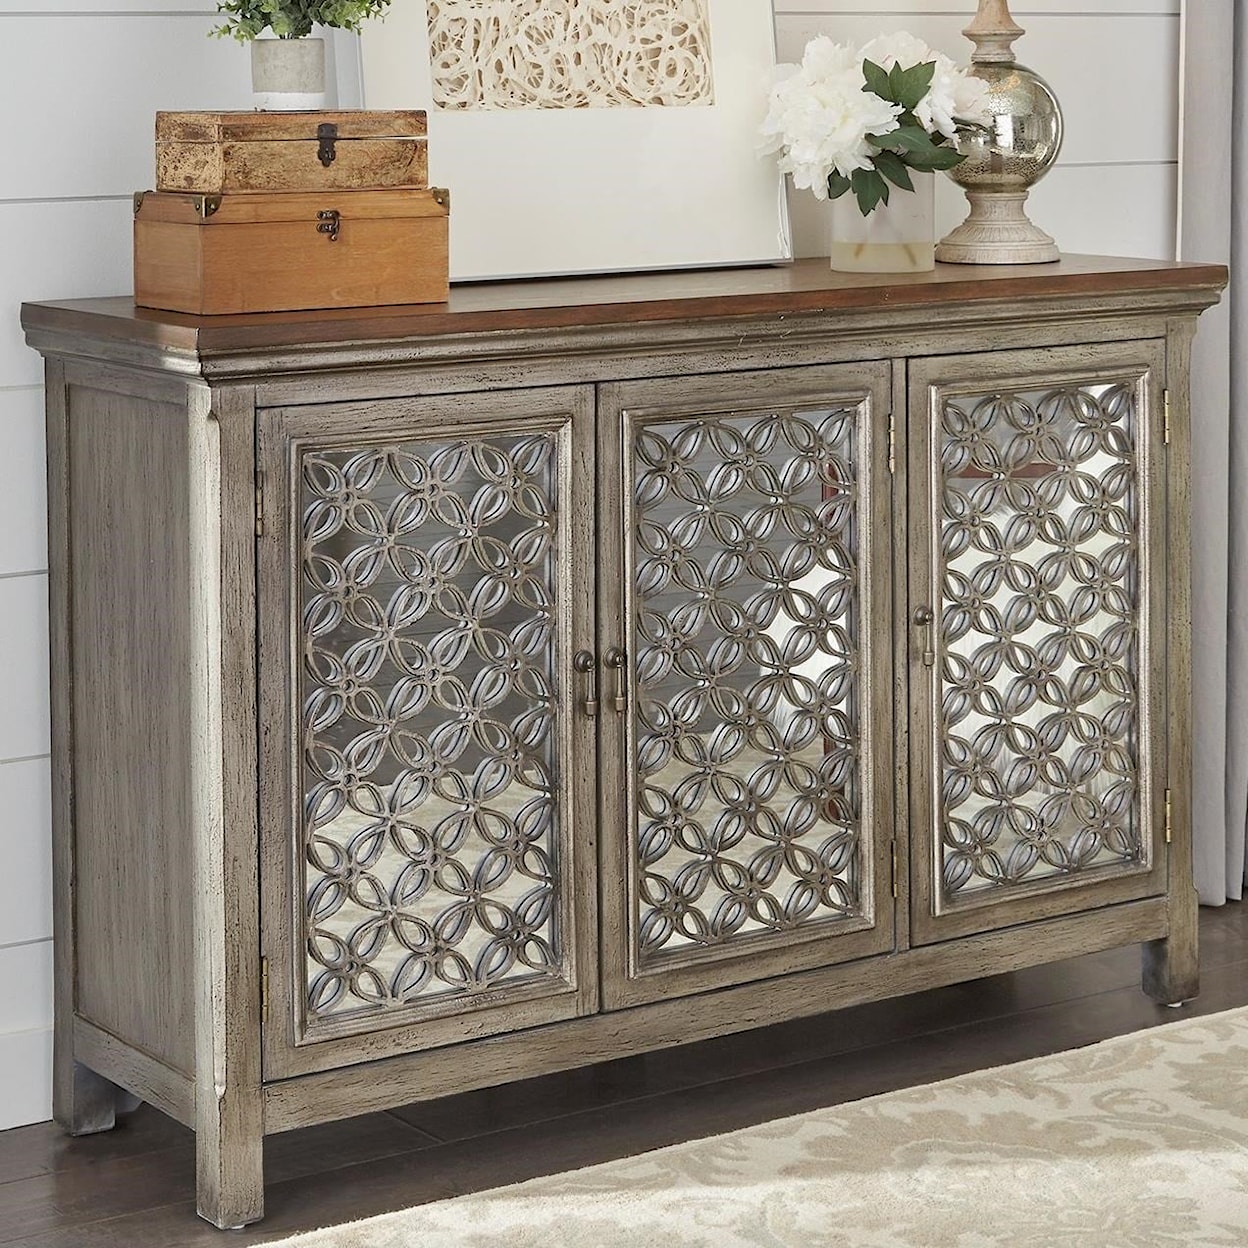 Libby Eclectic Living Accents 3-Door Accent Chest